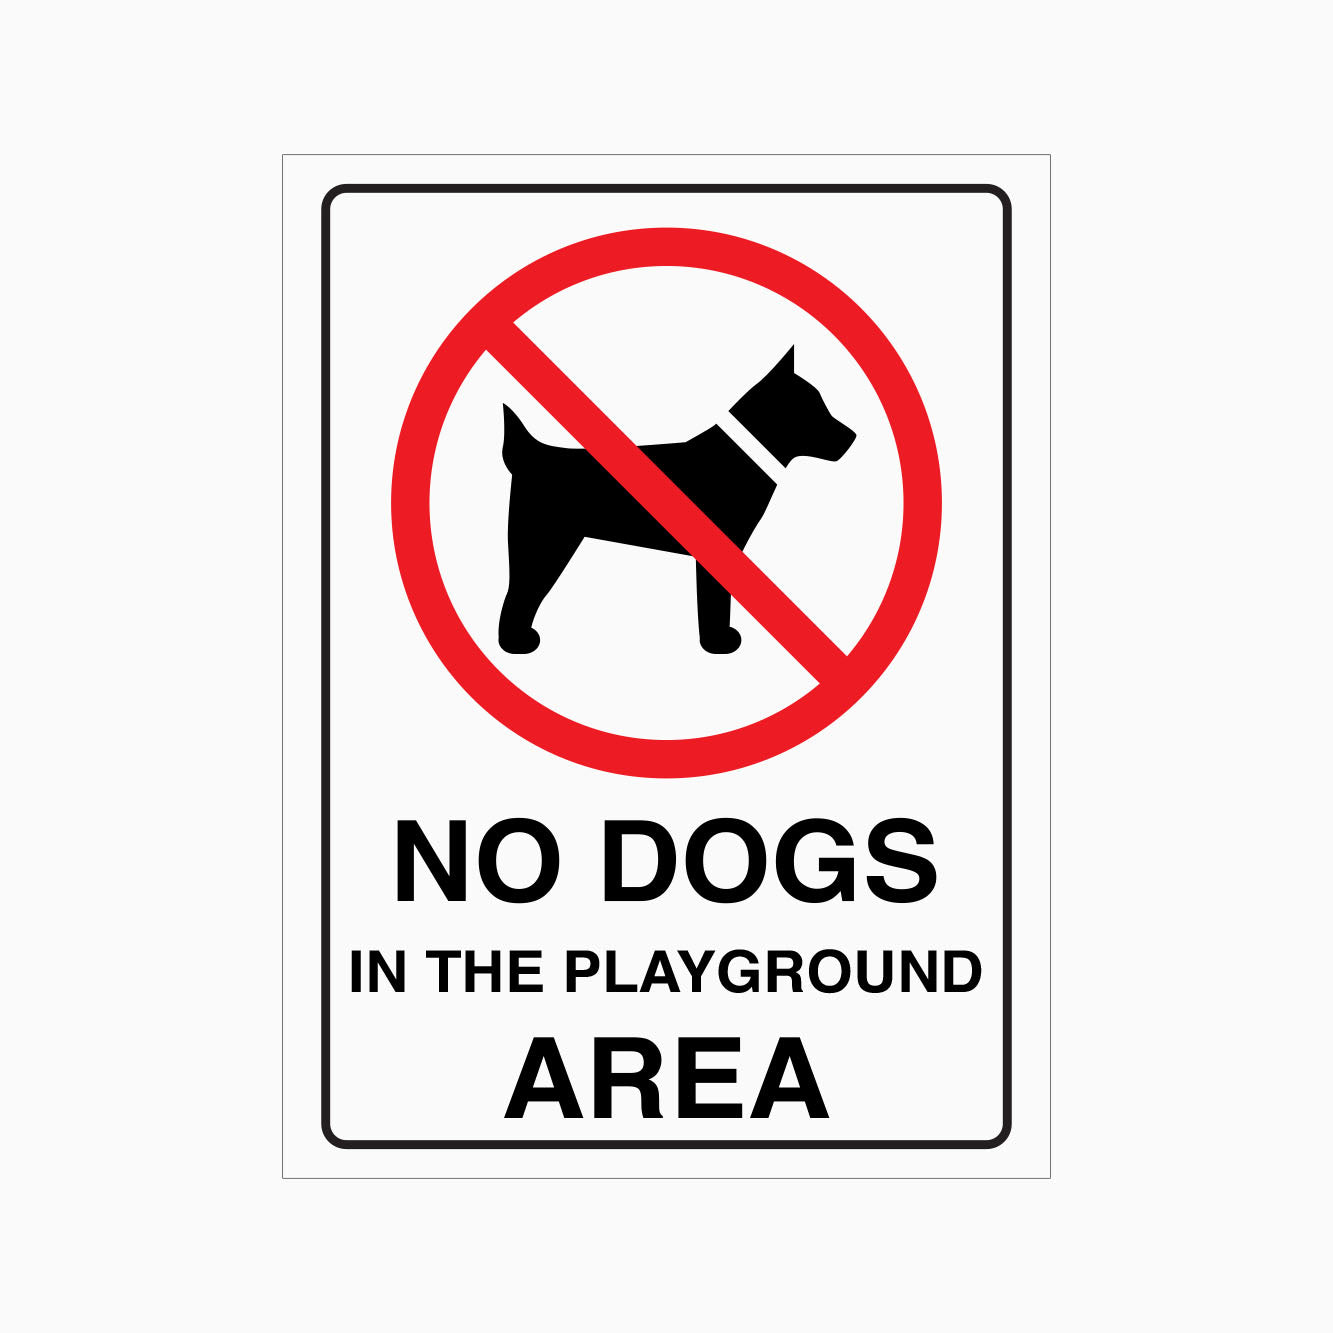 NO DOGS IN THE PLAYGROUND AREA SIGN